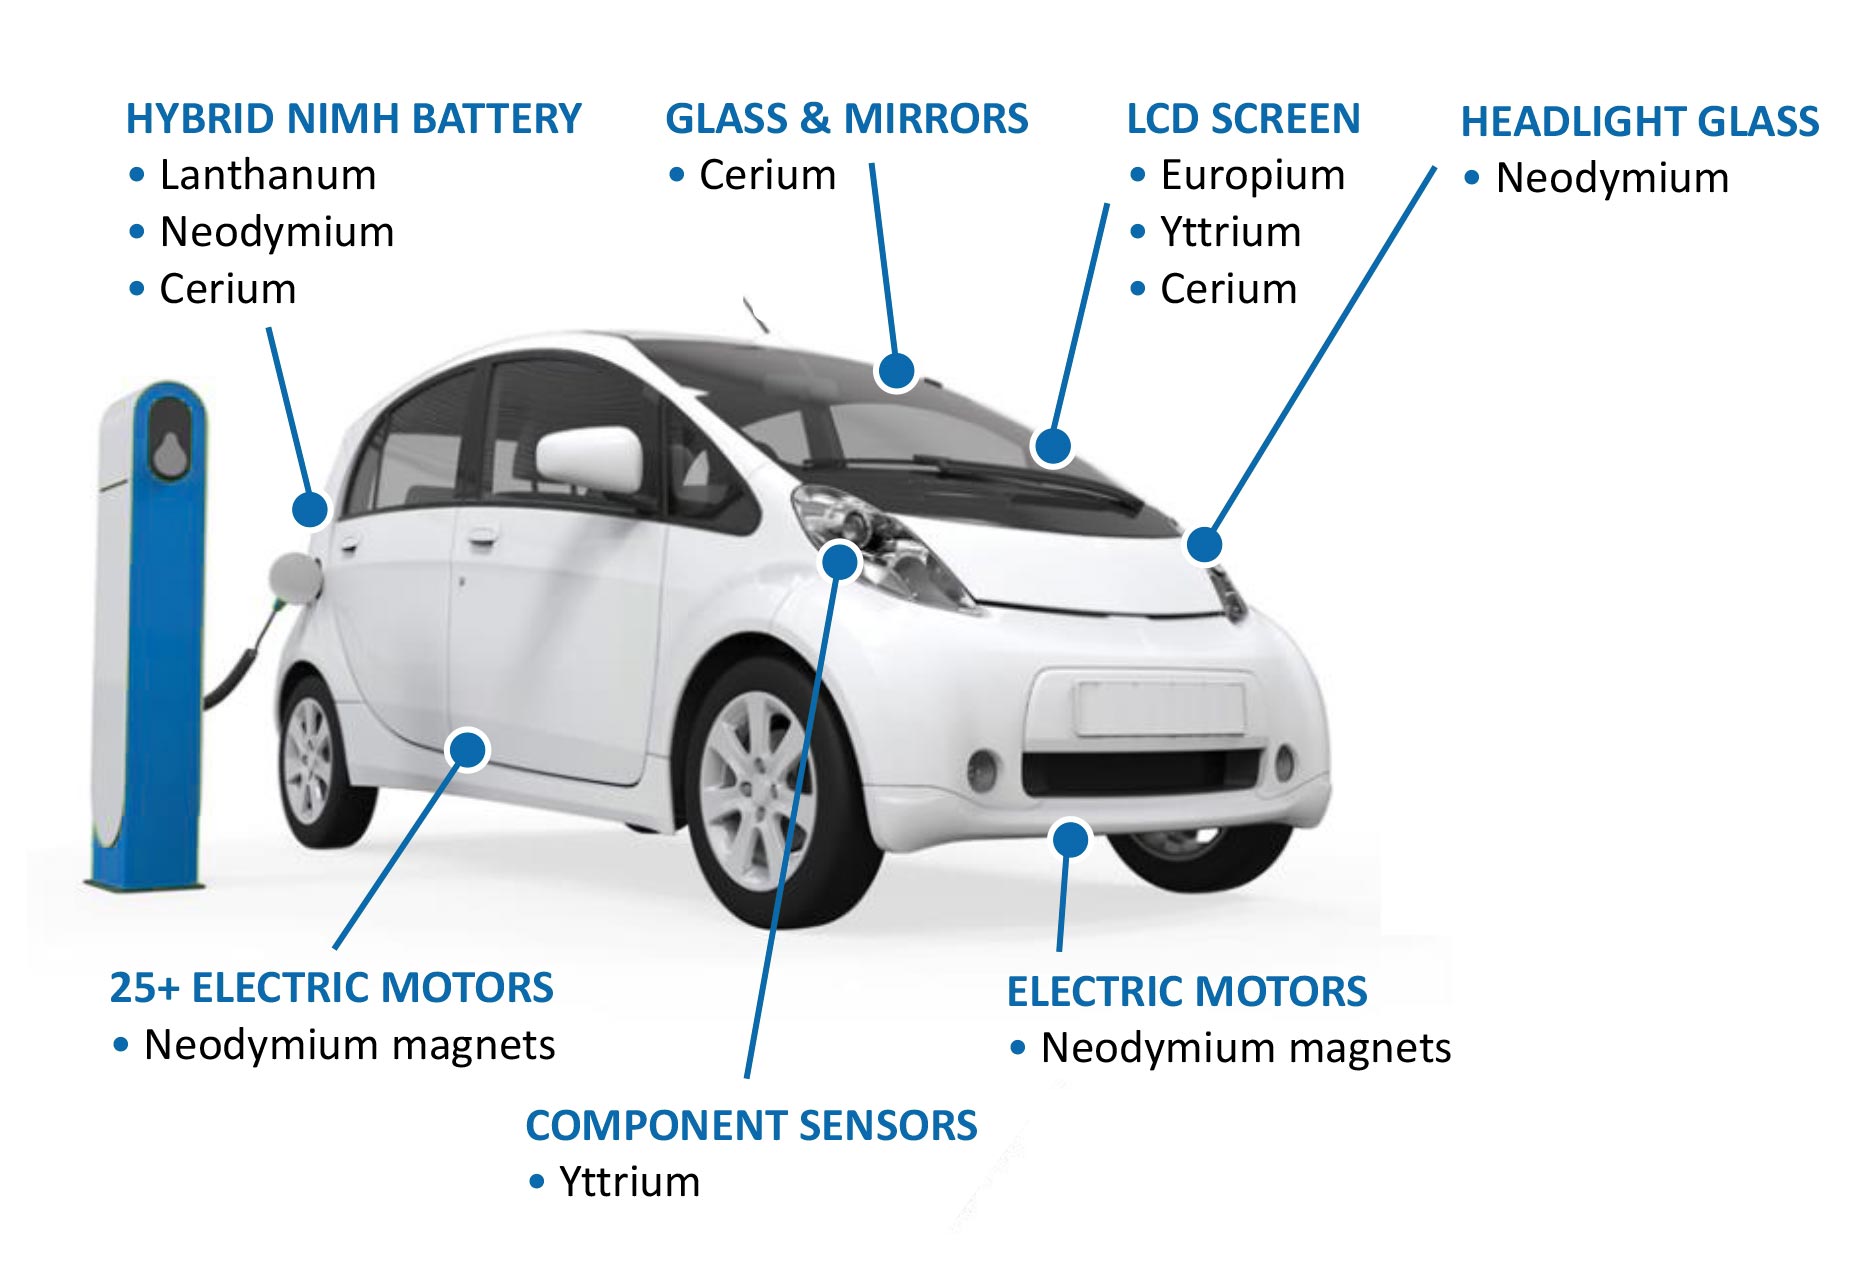 Rare earth resources in electric vehicles. Source: Adamas Research